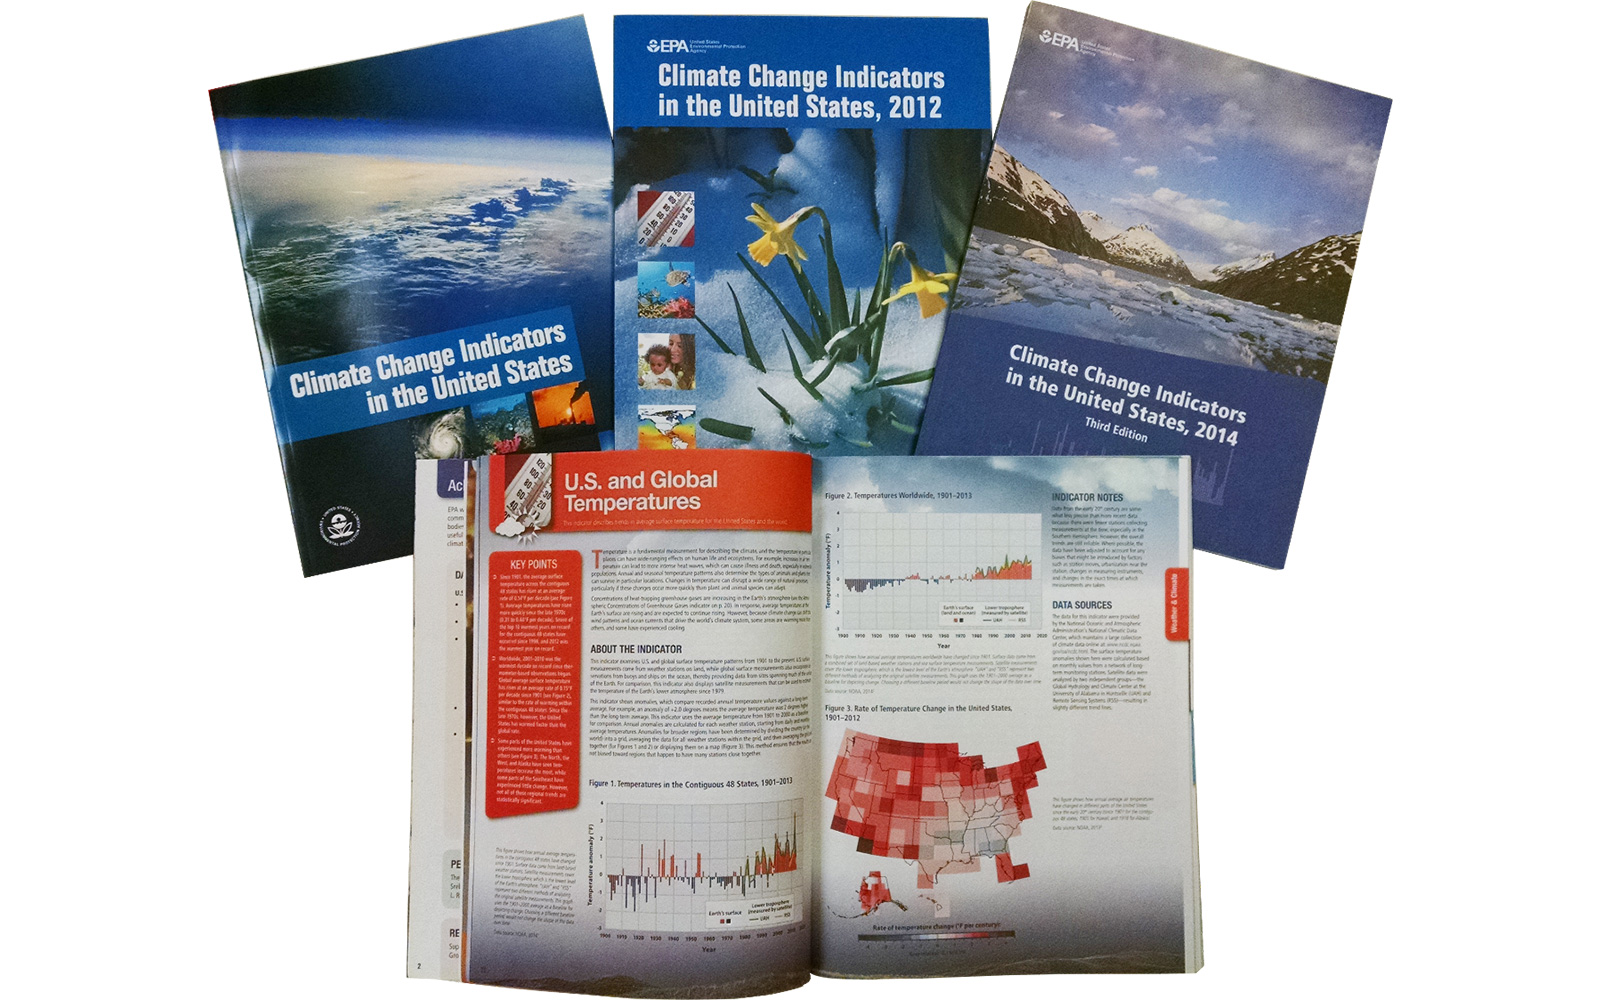 Covers and/or pages from several EPA "Climate Change Indicators in the United States" publications